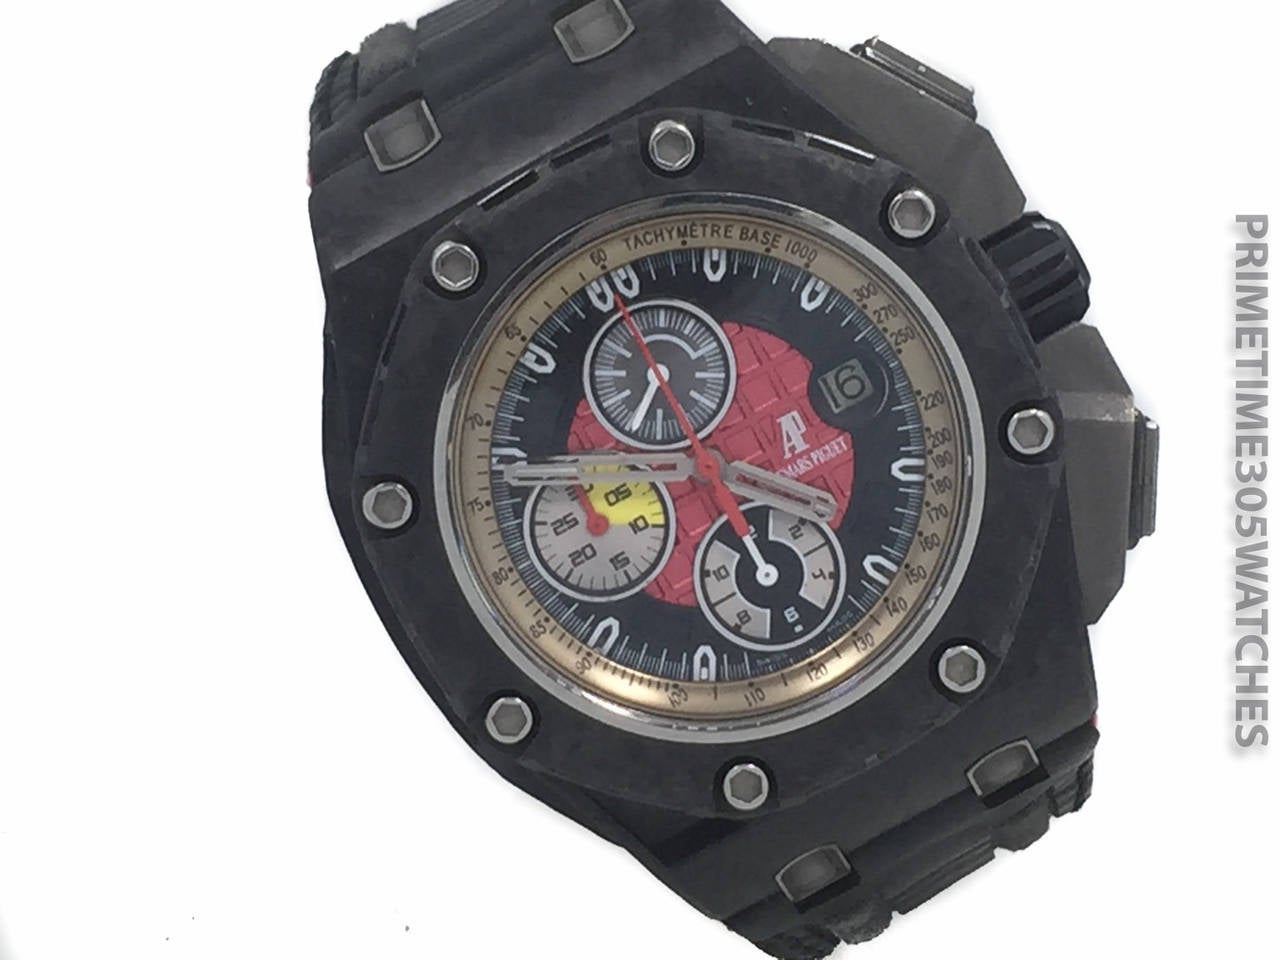 Mens Audemars Piguet Royal Oak Offshore Grand Prix Chronograph Limited Edition (1750 Pieces) Watch in Forged Carbon. This Watch is one of Audemars Piguet Most Popular Watches Ever Made and is Very Collectible. The Watch is in Excellent Condition &